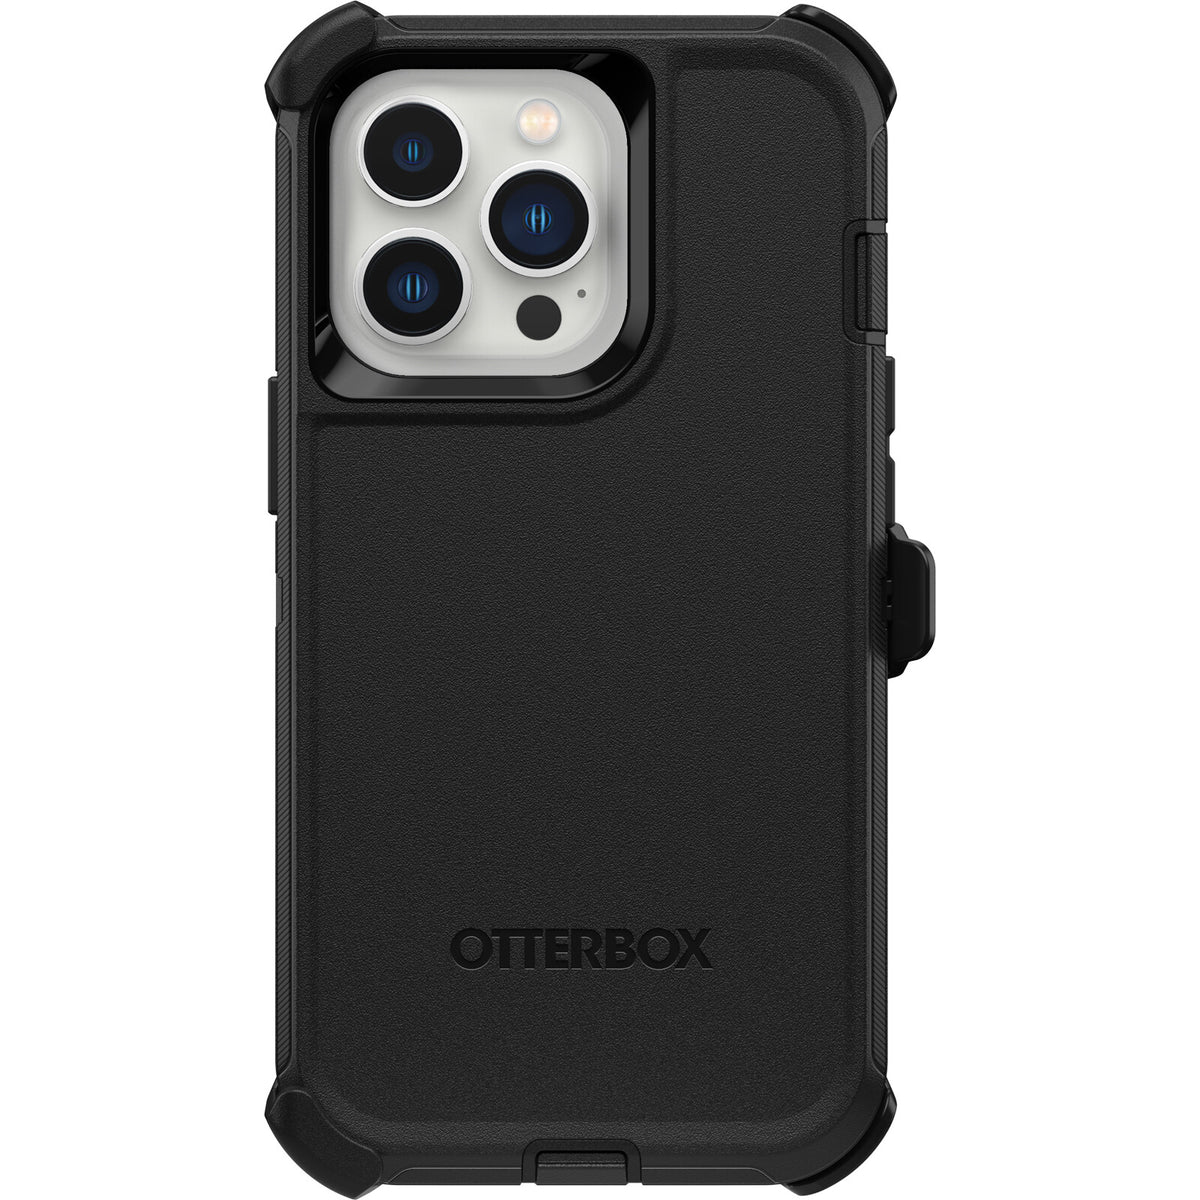 OtterBox Defender Case for iPhone 13 Pro Max, iPhone 12 Pro Max in Black